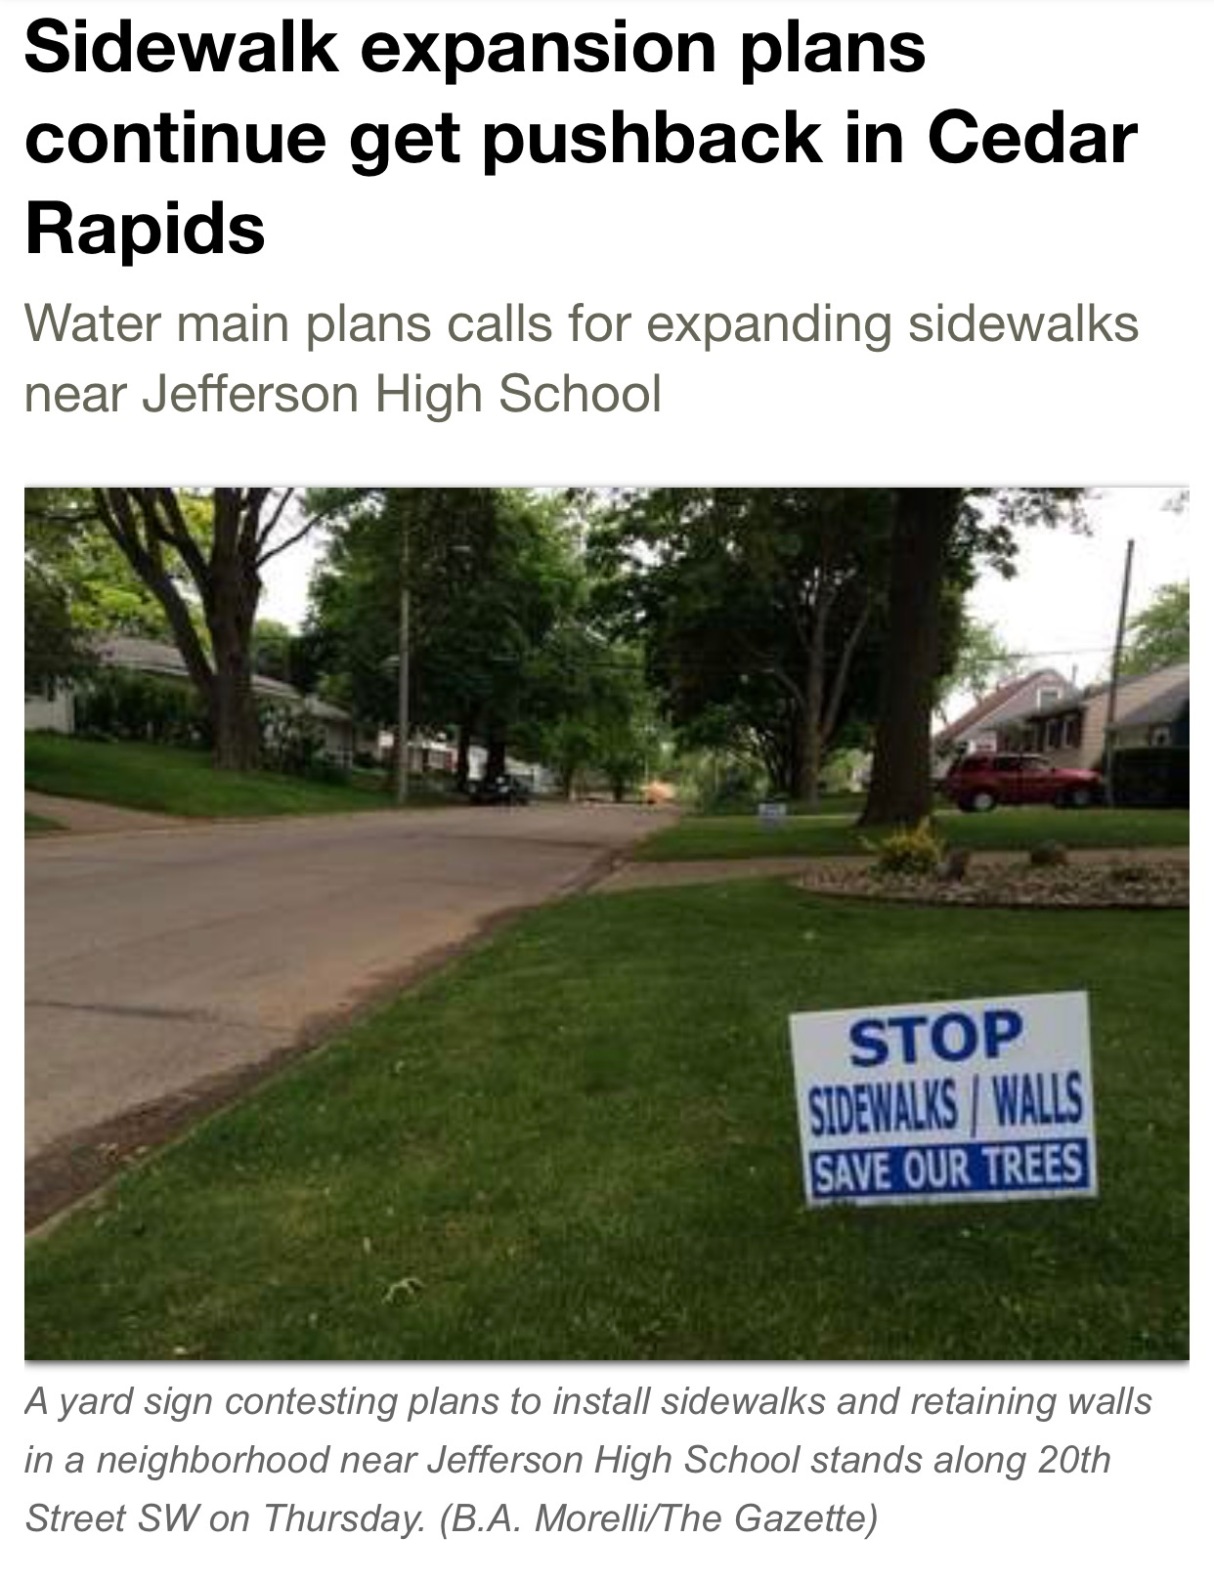 CR Gazette headline: Sidewalk expansion plans continue to get pushback in Cedar Rapids; water main plan calls for expanding sidewalks near Jefferson High School / photo of yard sign that says STOP SIDEWALKS /WALLS SAVE OUR TREES